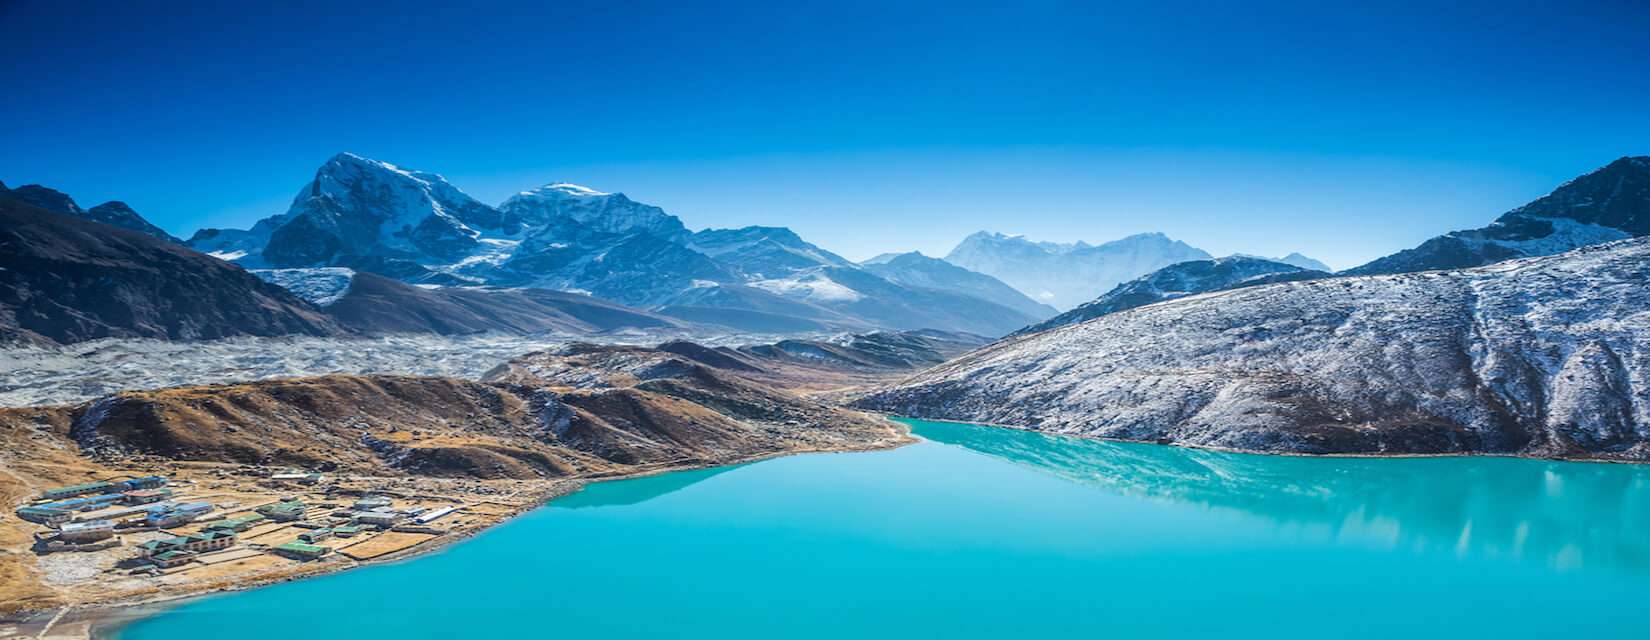 Everest with Gokyo and Cho La Pass - Himalayan Frozen Adventure